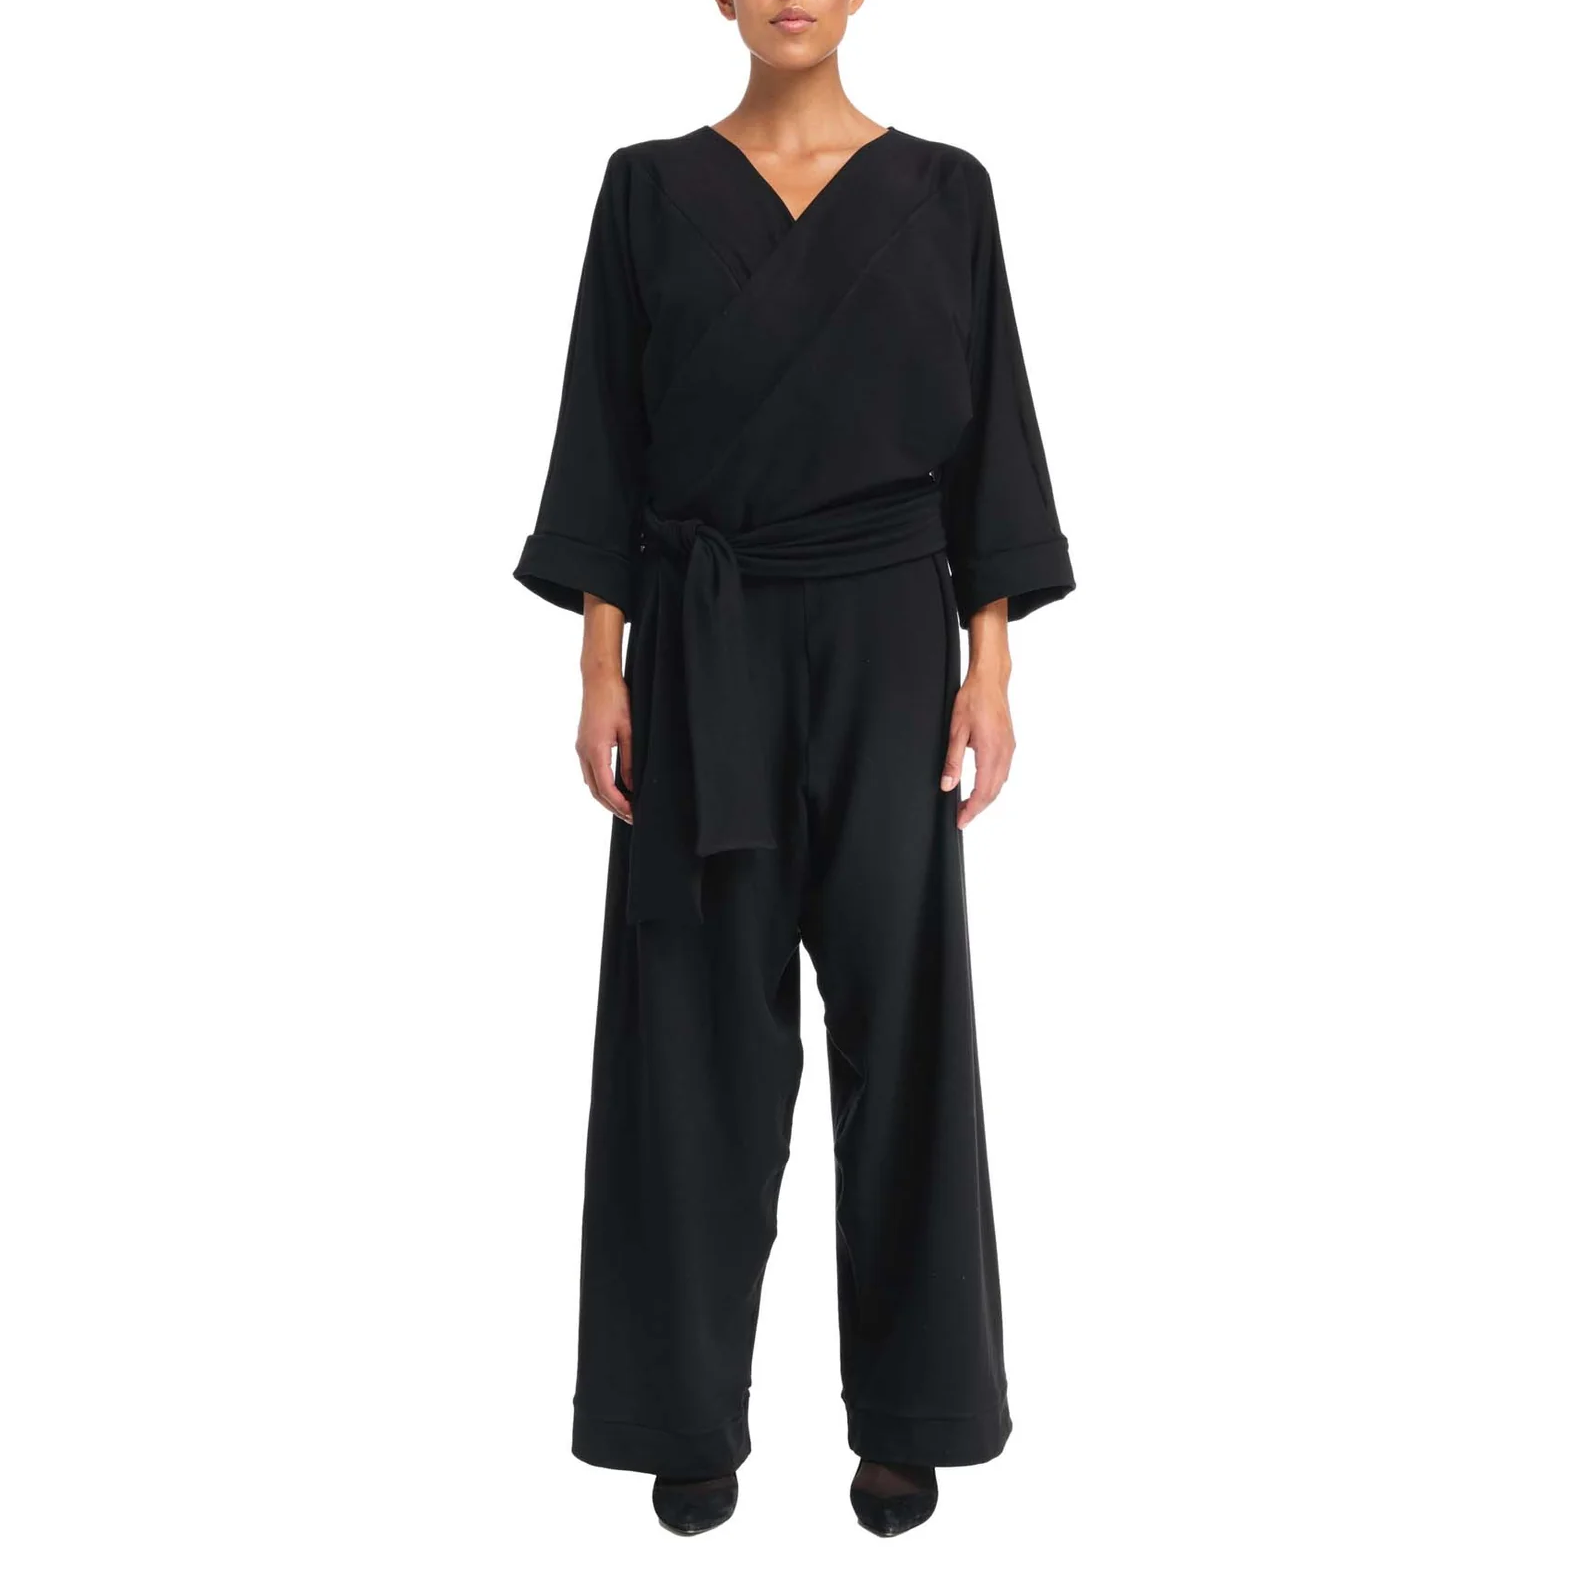 Soma jumpsuit by DSTM